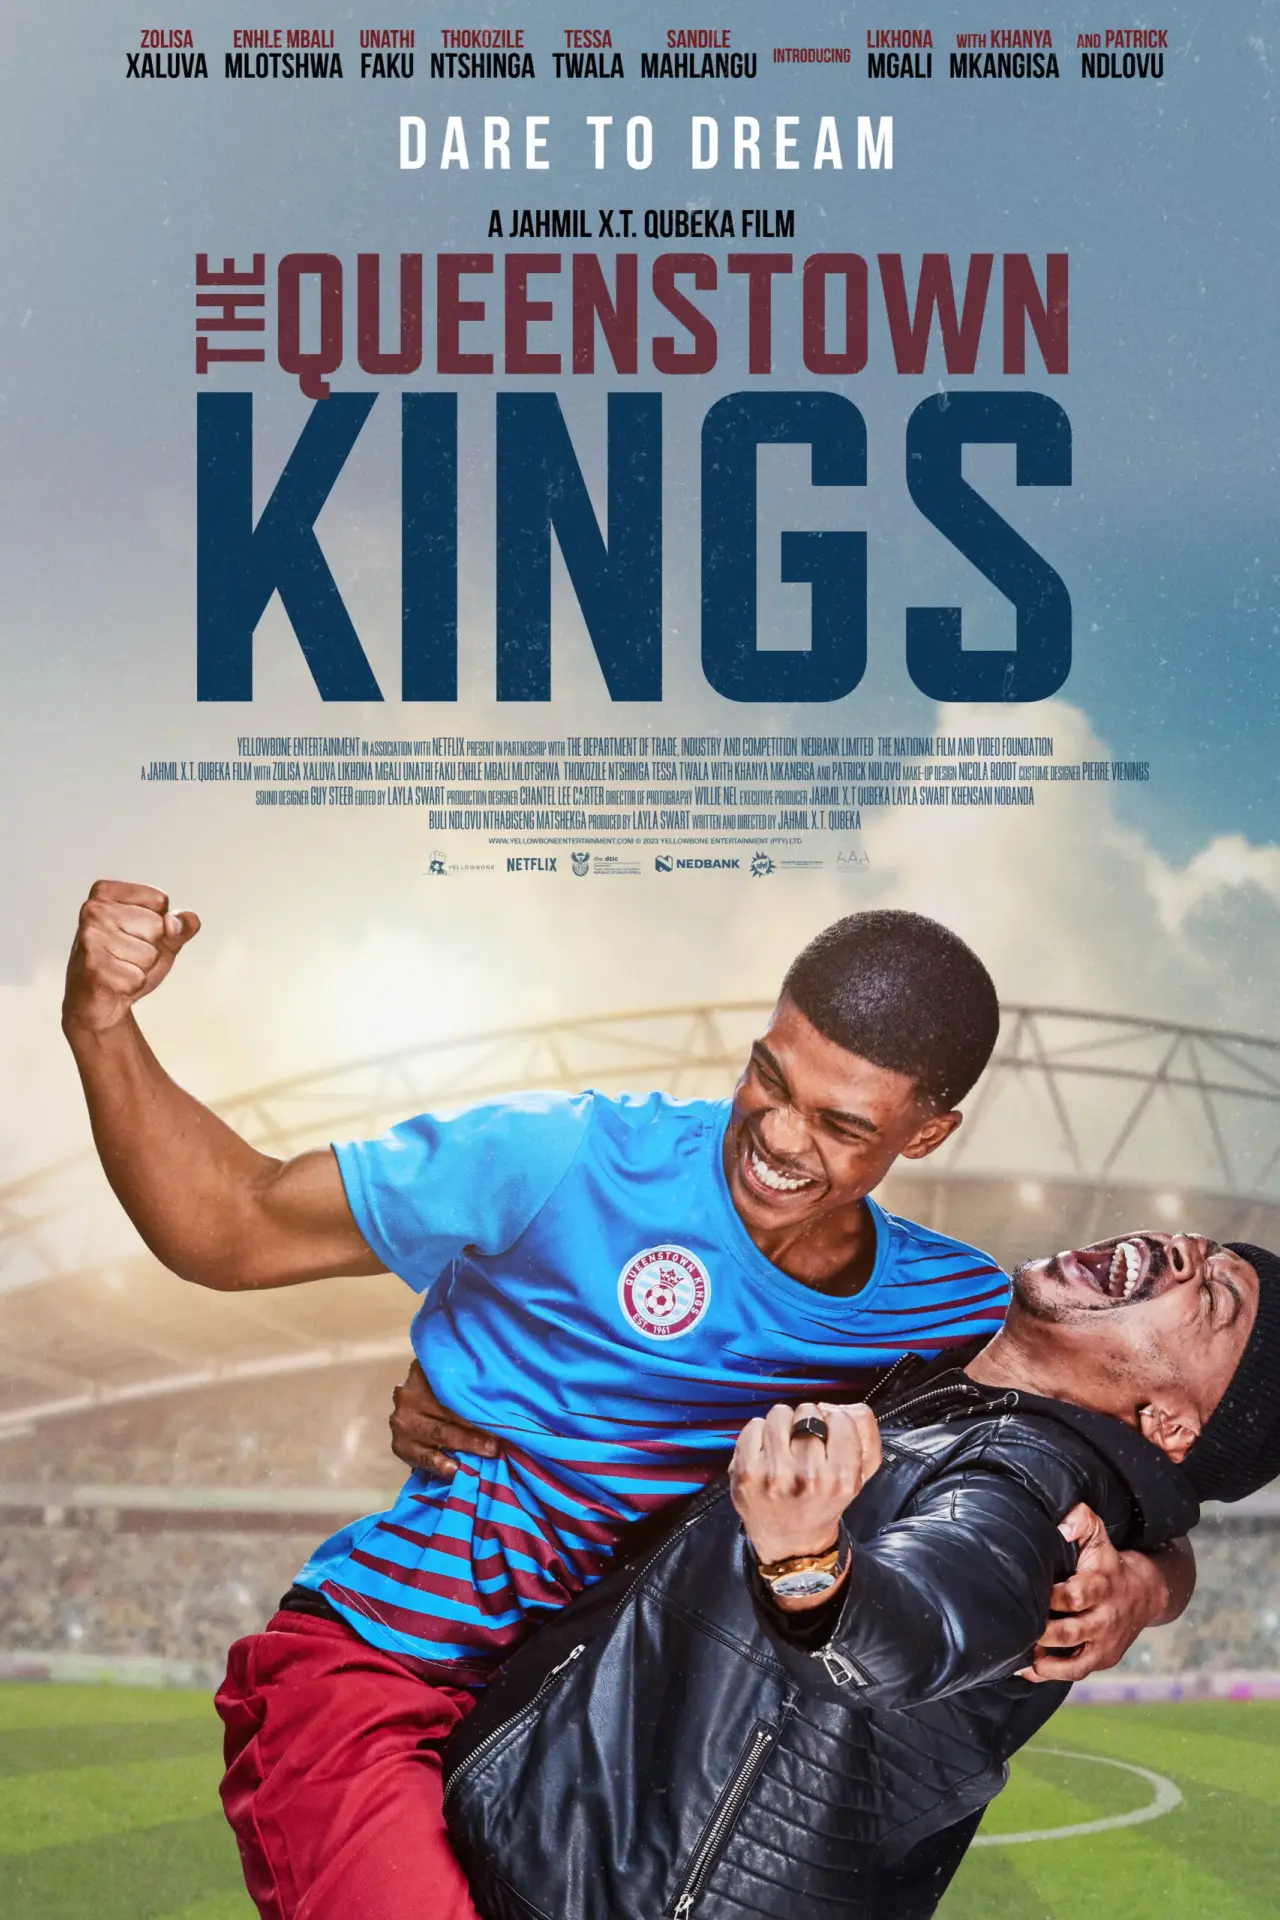 The Queebstown Kings poster